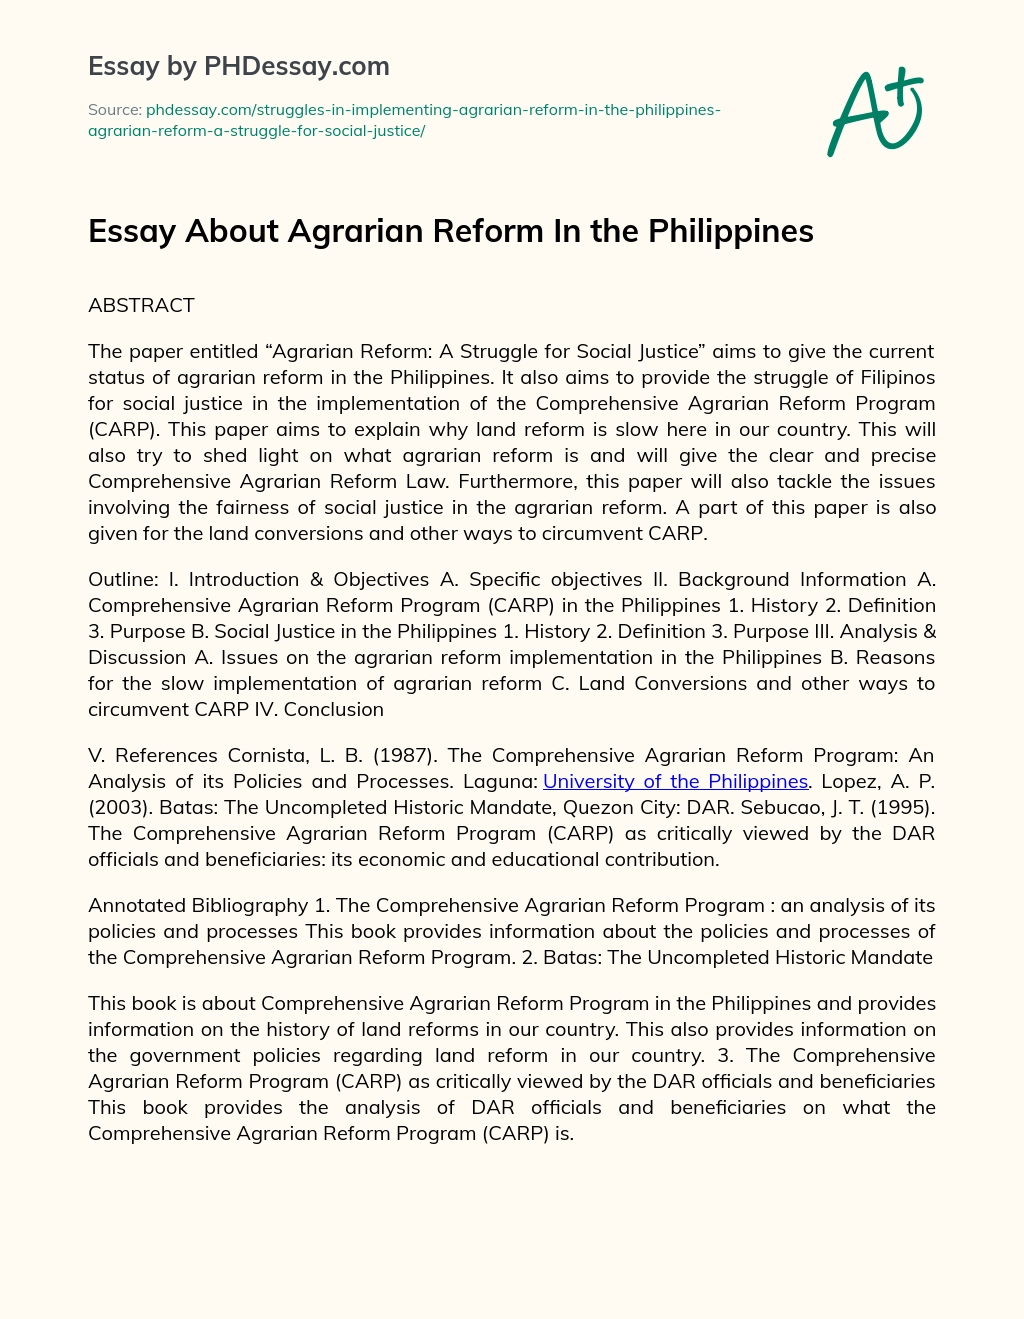 Essay About Agrarian Reform In the Philippines essay